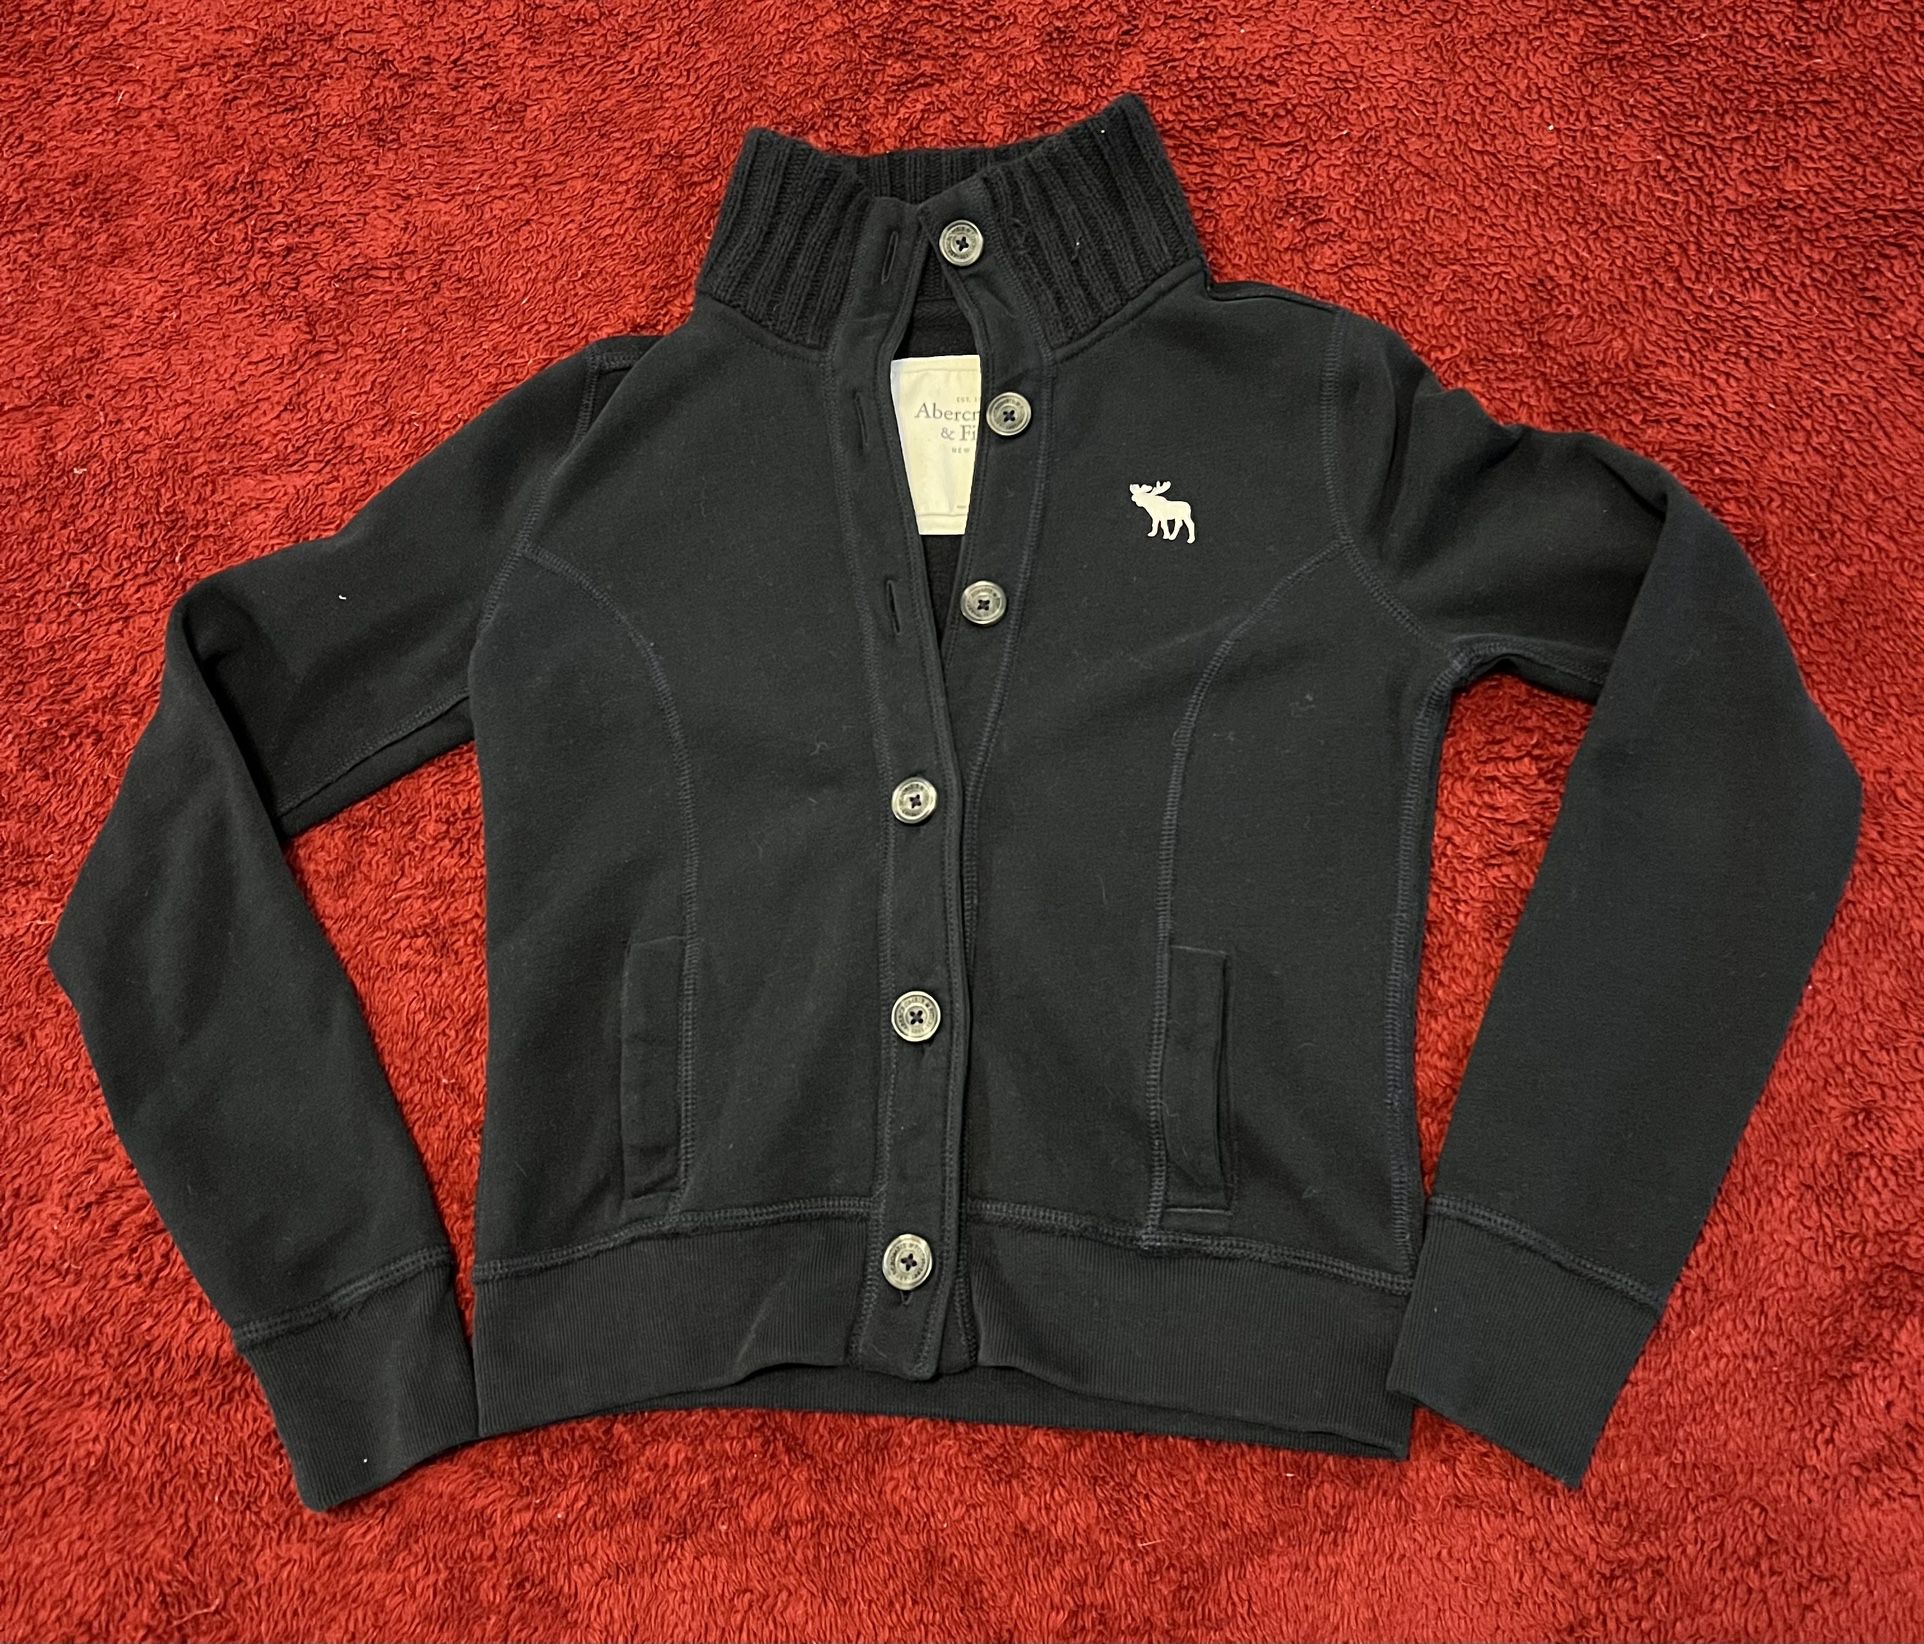 Abercrombie & Fitch Cardigan Girls size small.